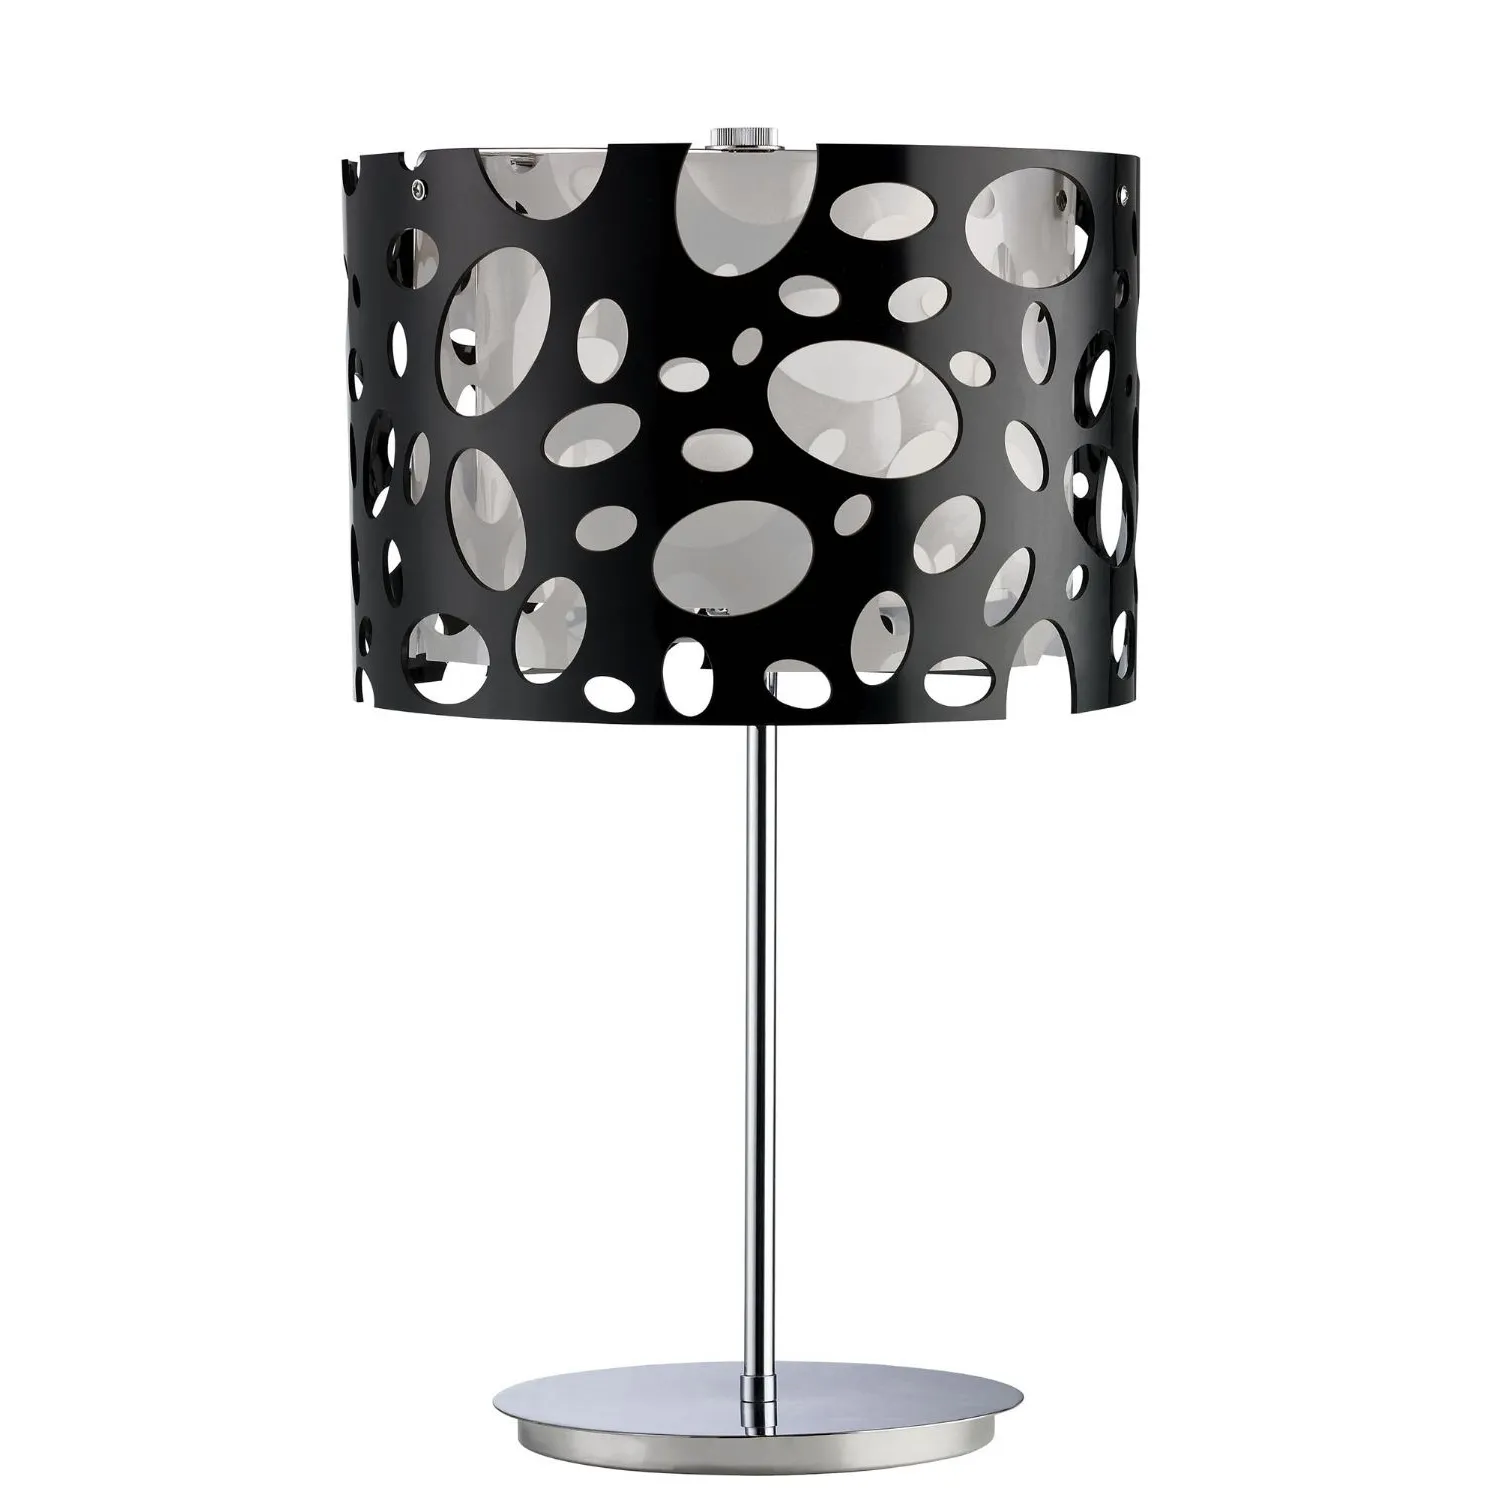 Lupin Table Lamp 1 Light E27, Gloss Black White Acrylic Polished Chrome, CFL Lamps INCLUDED